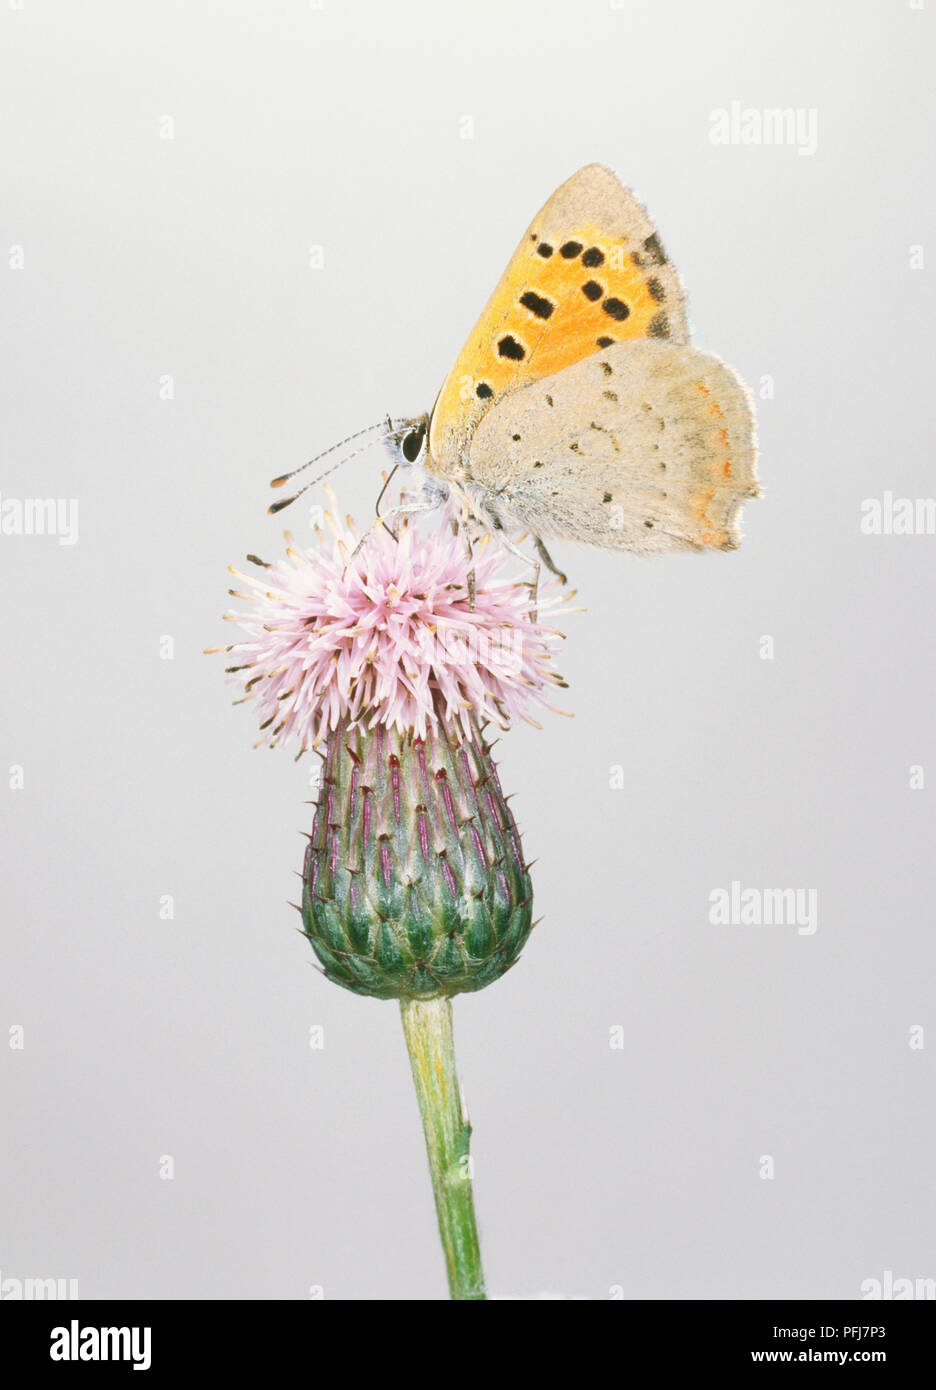 Butterfly (Lepidoptera), yellow with black dots feeding on light purple flower Stock Photo